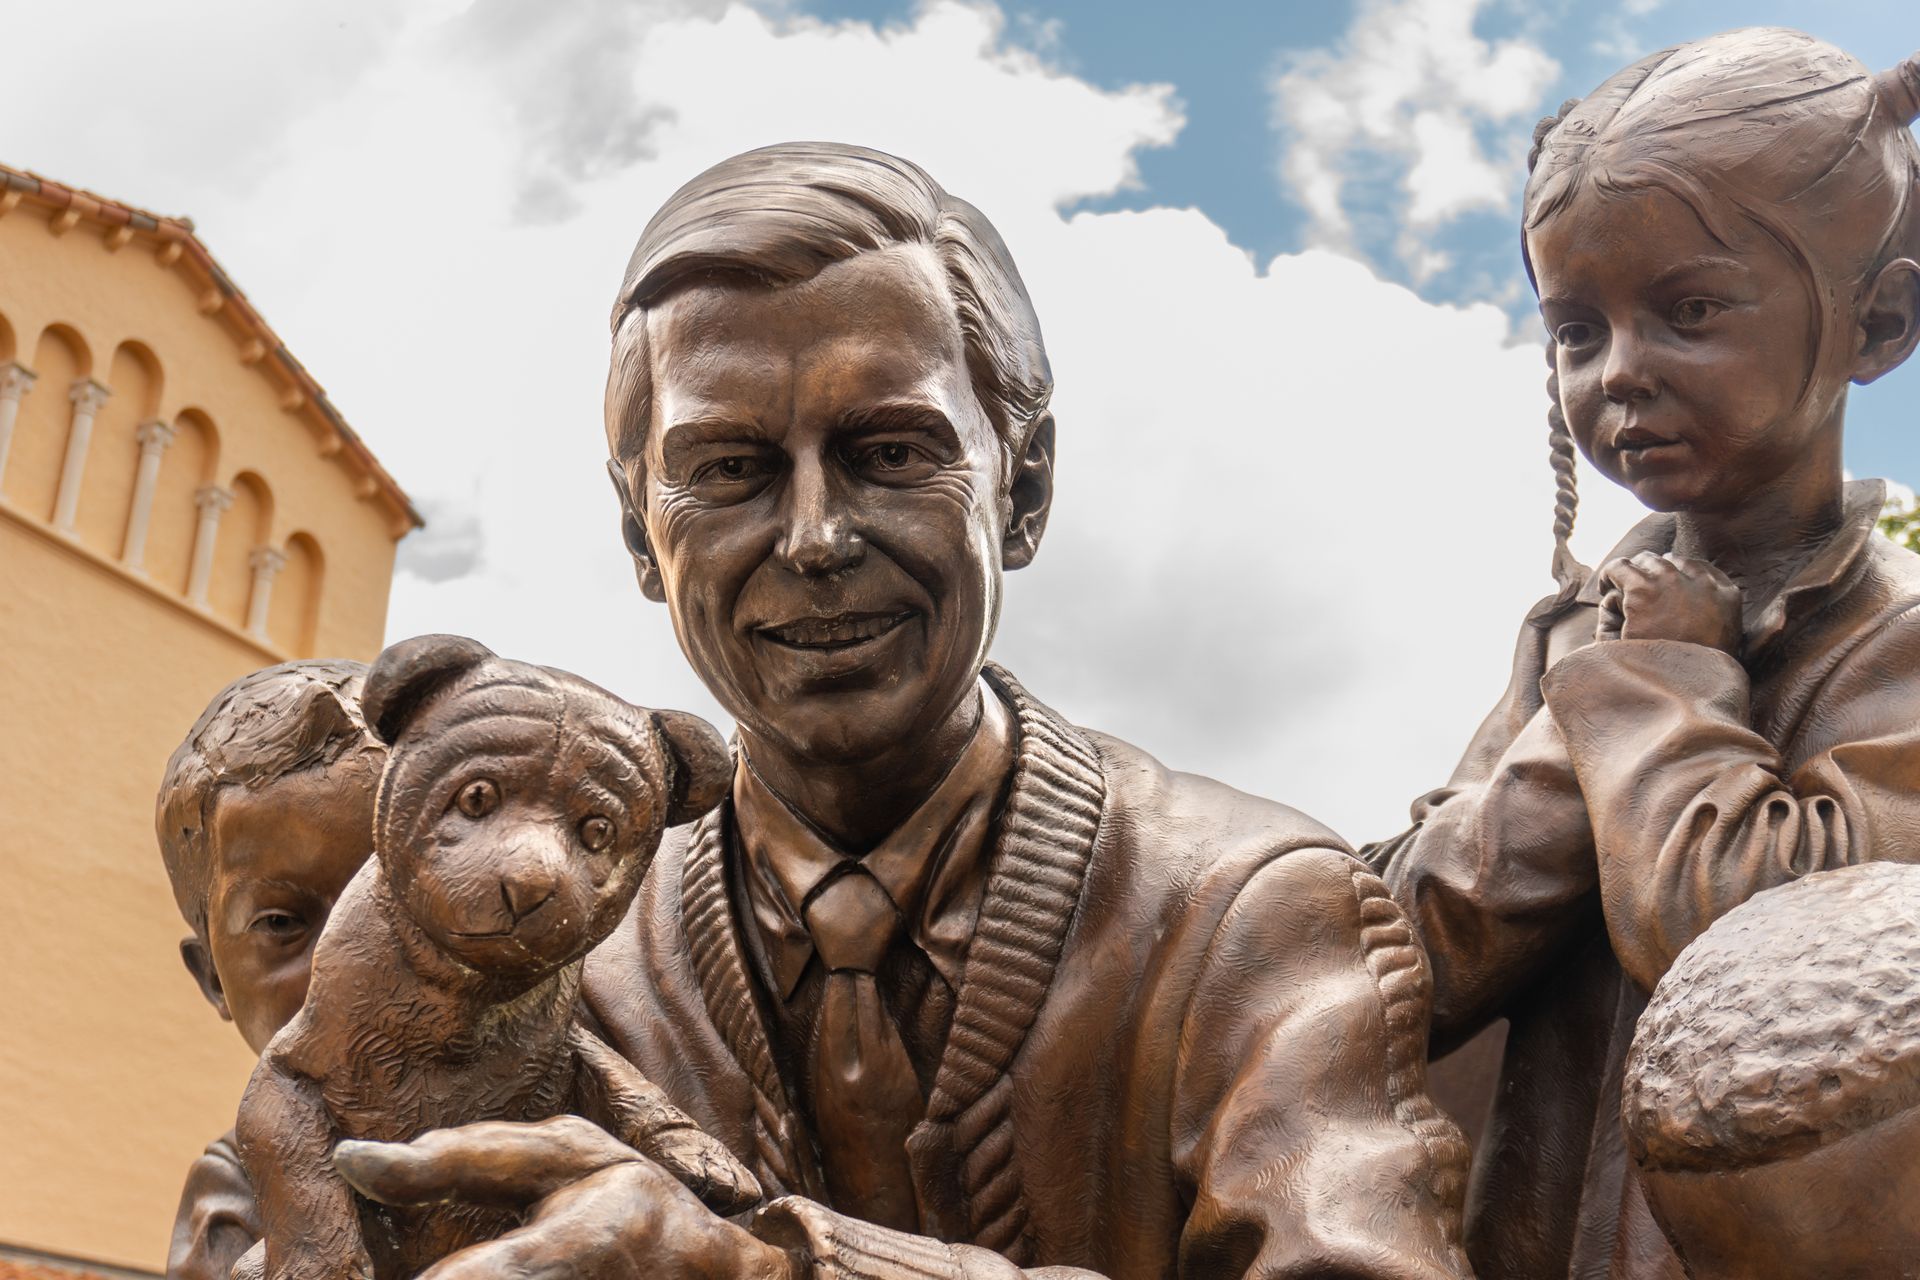 Statue of Fred Rogers with children and Daniel Tiger puppet in Winter Park, FL